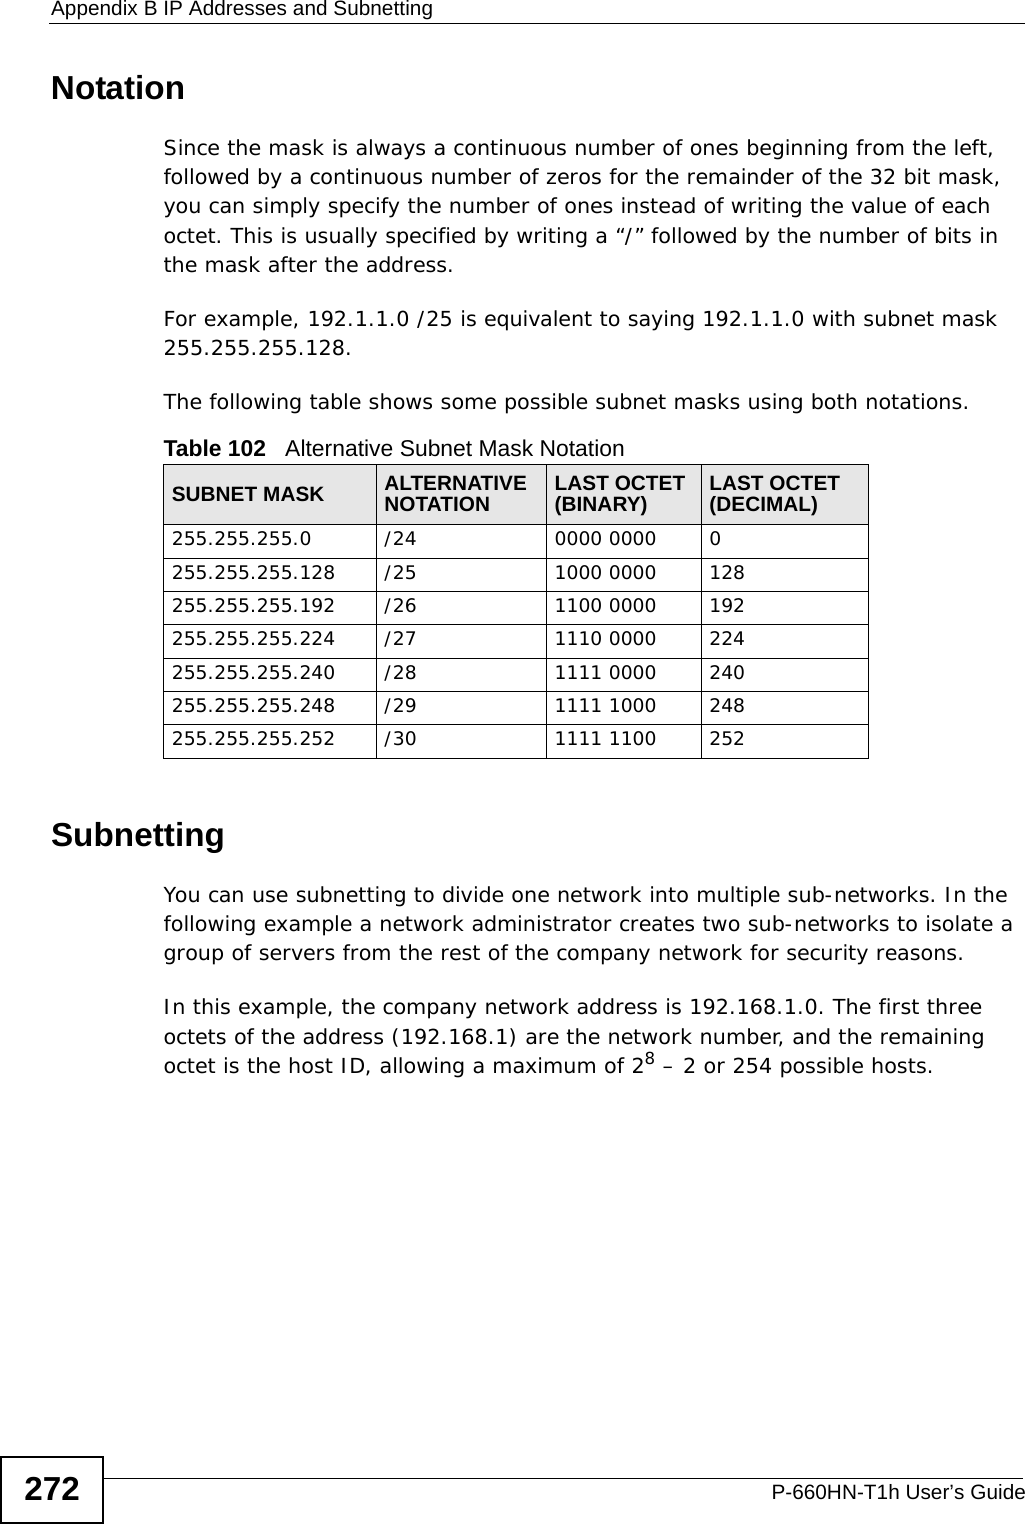 Appendix B IP Addresses and SubnettingP-660HN-T1h User’s Guide272NotationSince the mask is always a continuous number of ones beginning from the left, followed by a continuous number of zeros for the remainder of the 32 bit mask, you can simply specify the number of ones instead of writing the value of each octet. This is usually specified by writing a “/” followed by the number of bits in the mask after the address. For example, 192.1.1.0 /25 is equivalent to saying 192.1.1.0 with subnet mask 255.255.255.128. The following table shows some possible subnet masks using both notations. SubnettingYou can use subnetting to divide one network into multiple sub-networks. In the following example a network administrator creates two sub-networks to isolate a group of servers from the rest of the company network for security reasons.In this example, the company network address is 192.168.1.0. The first three octets of the address (192.168.1) are the network number, and the remaining octet is the host ID, allowing a maximum of 28 – 2 or 254 possible hosts.Table 102   Alternative Subnet Mask NotationSUBNET MASK ALTERNATIVE NOTATION LAST OCTET (BINARY) LAST OCTET (DECIMAL)255.255.255.0 /24 0000 0000 0255.255.255.128 /25 1000 0000 128255.255.255.192 /26 1100 0000 192255.255.255.224 /27 1110 0000 224255.255.255.240 /28 1111 0000 240255.255.255.248 /29 1111 1000 248255.255.255.252 /30 1111 1100 252